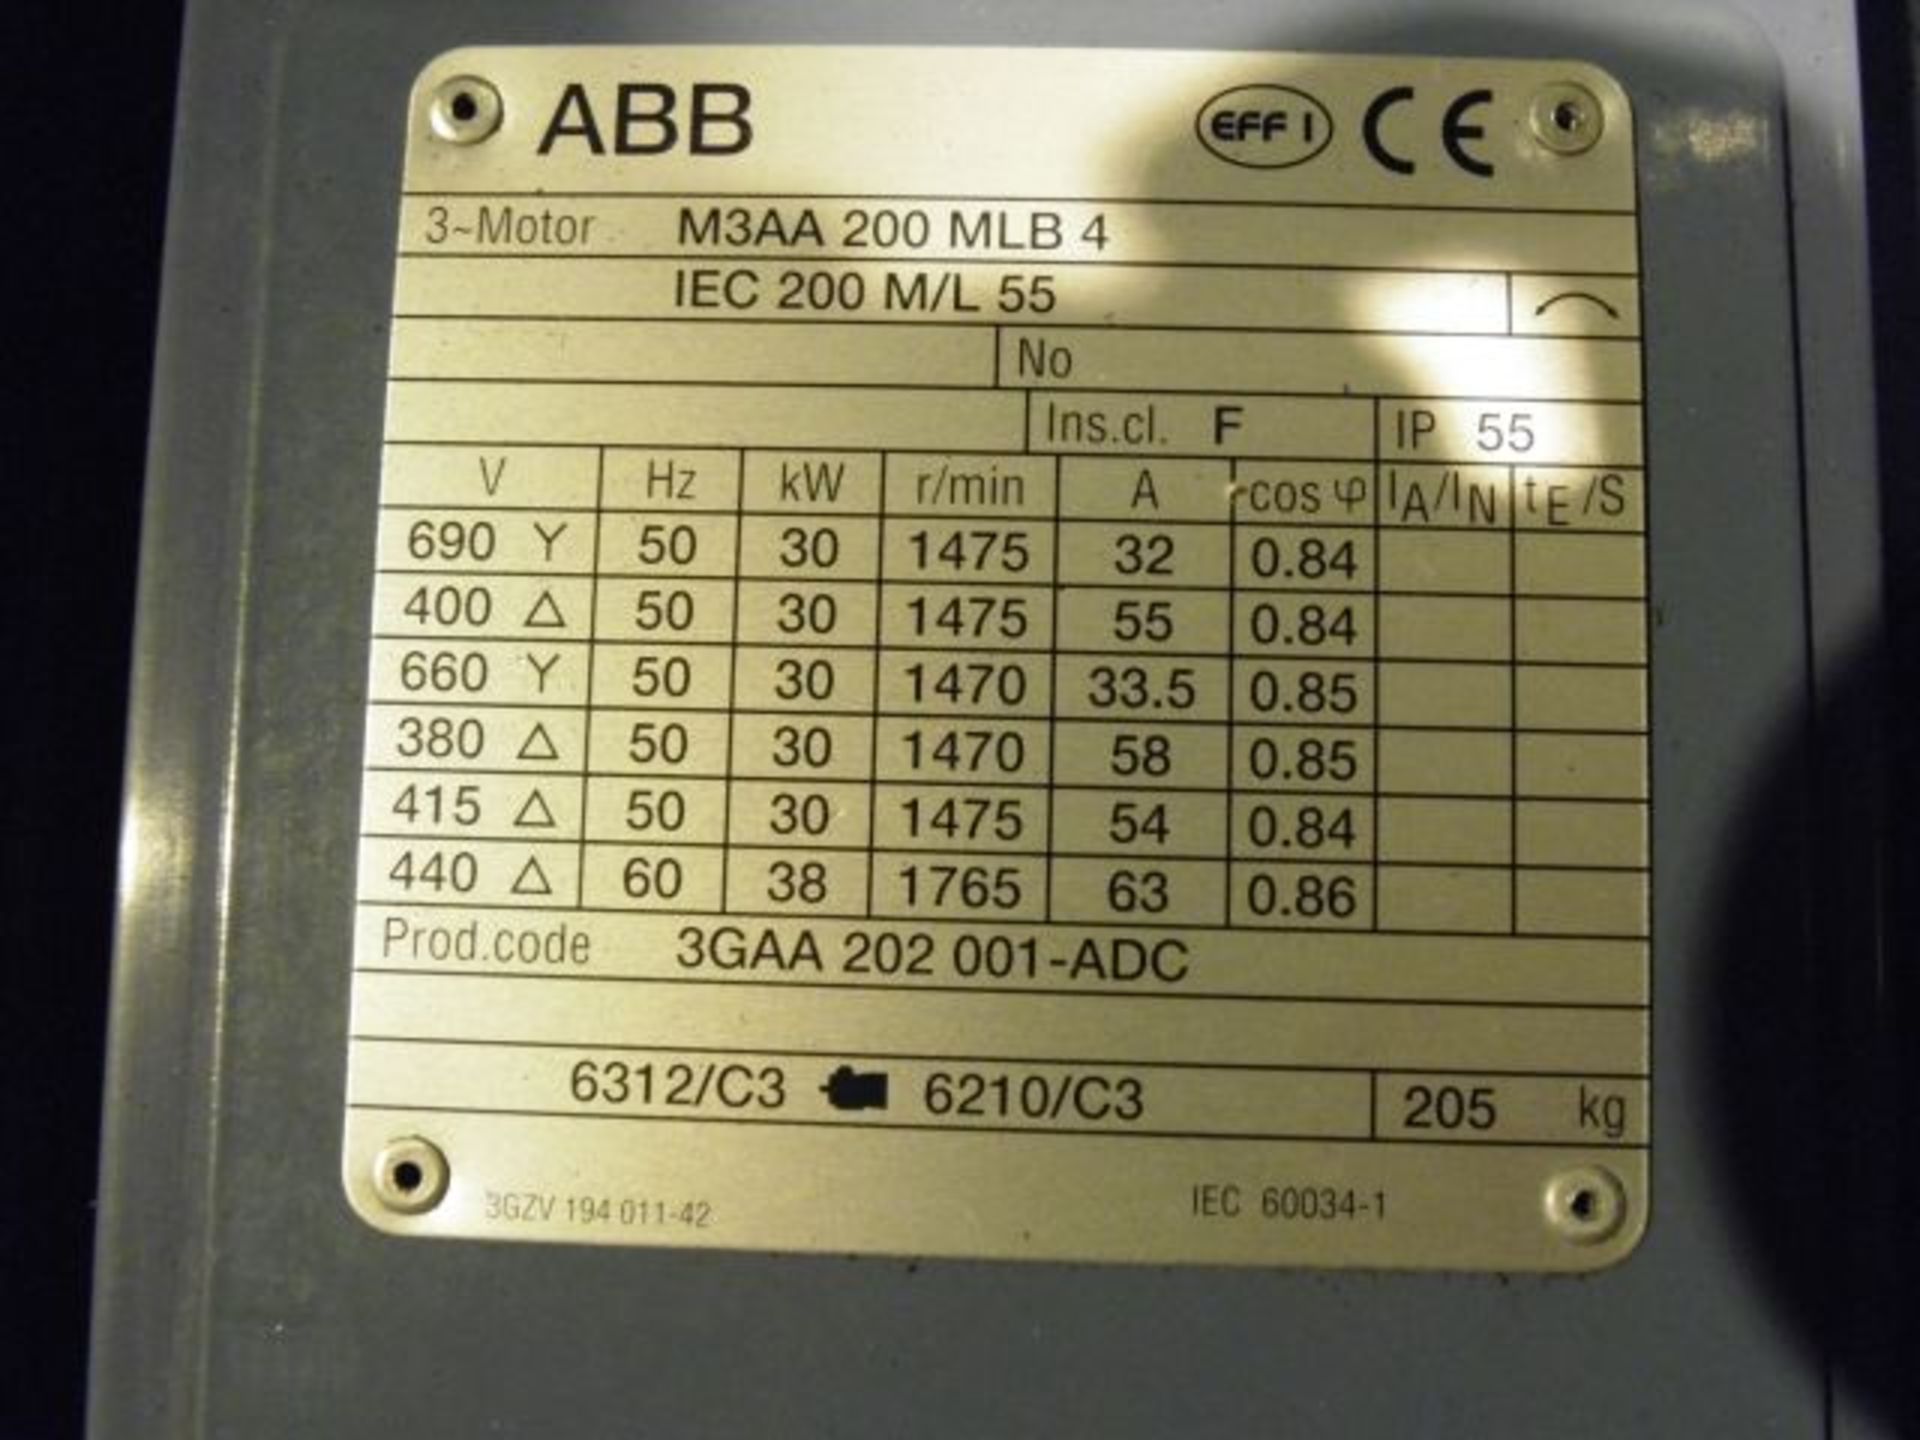 * ABB 30kw 3 Phase Motor; Type M3AA 200MLB 4; 205kg; 1475 R/Min. Loaded onto Buyer's Transport - Image 2 of 2